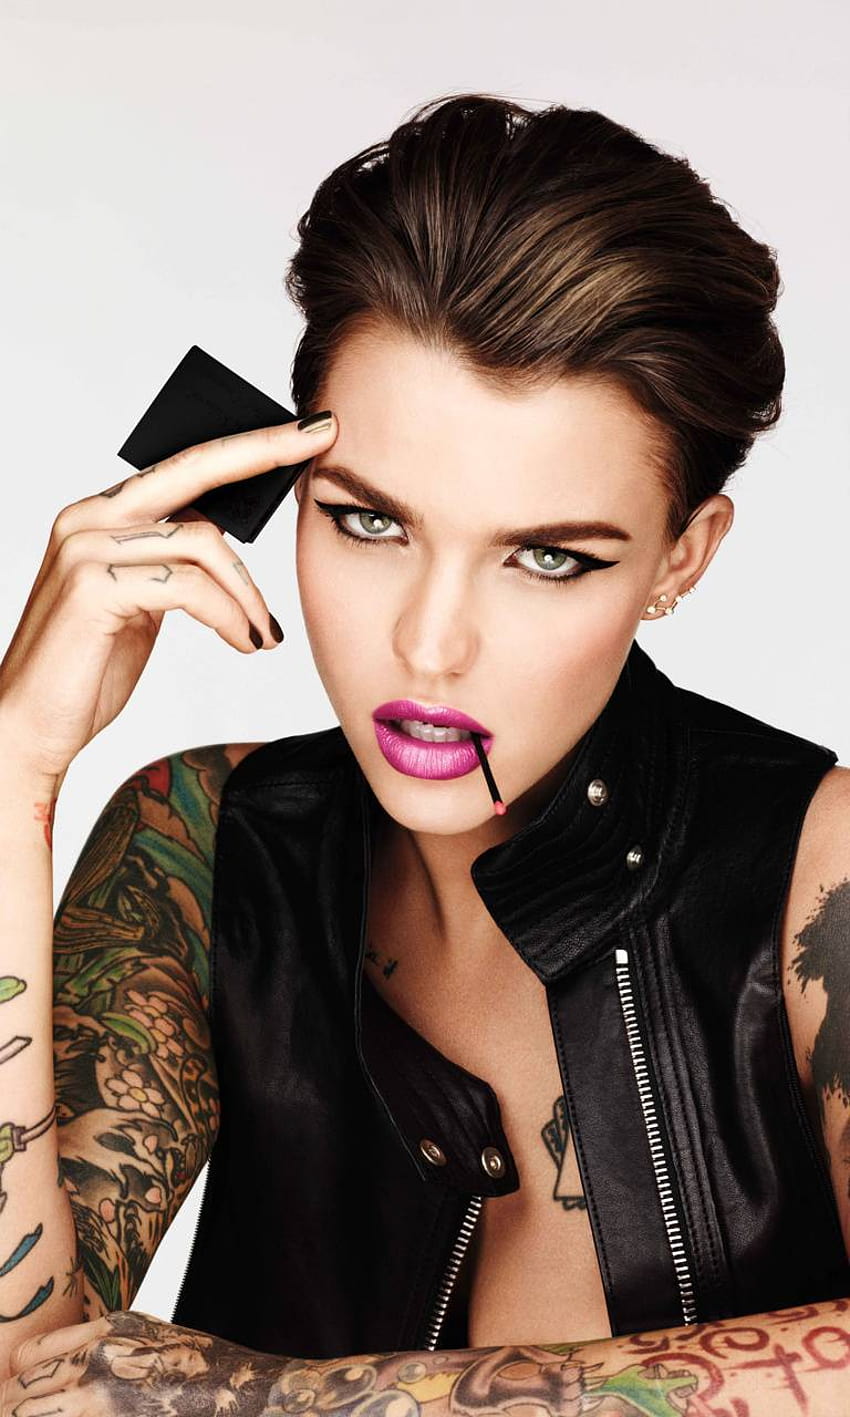 Wallpaper actress tattoo cutie short hairstyle XXX Ruby Rose Ruby Rose  images for desktop section девушки  download